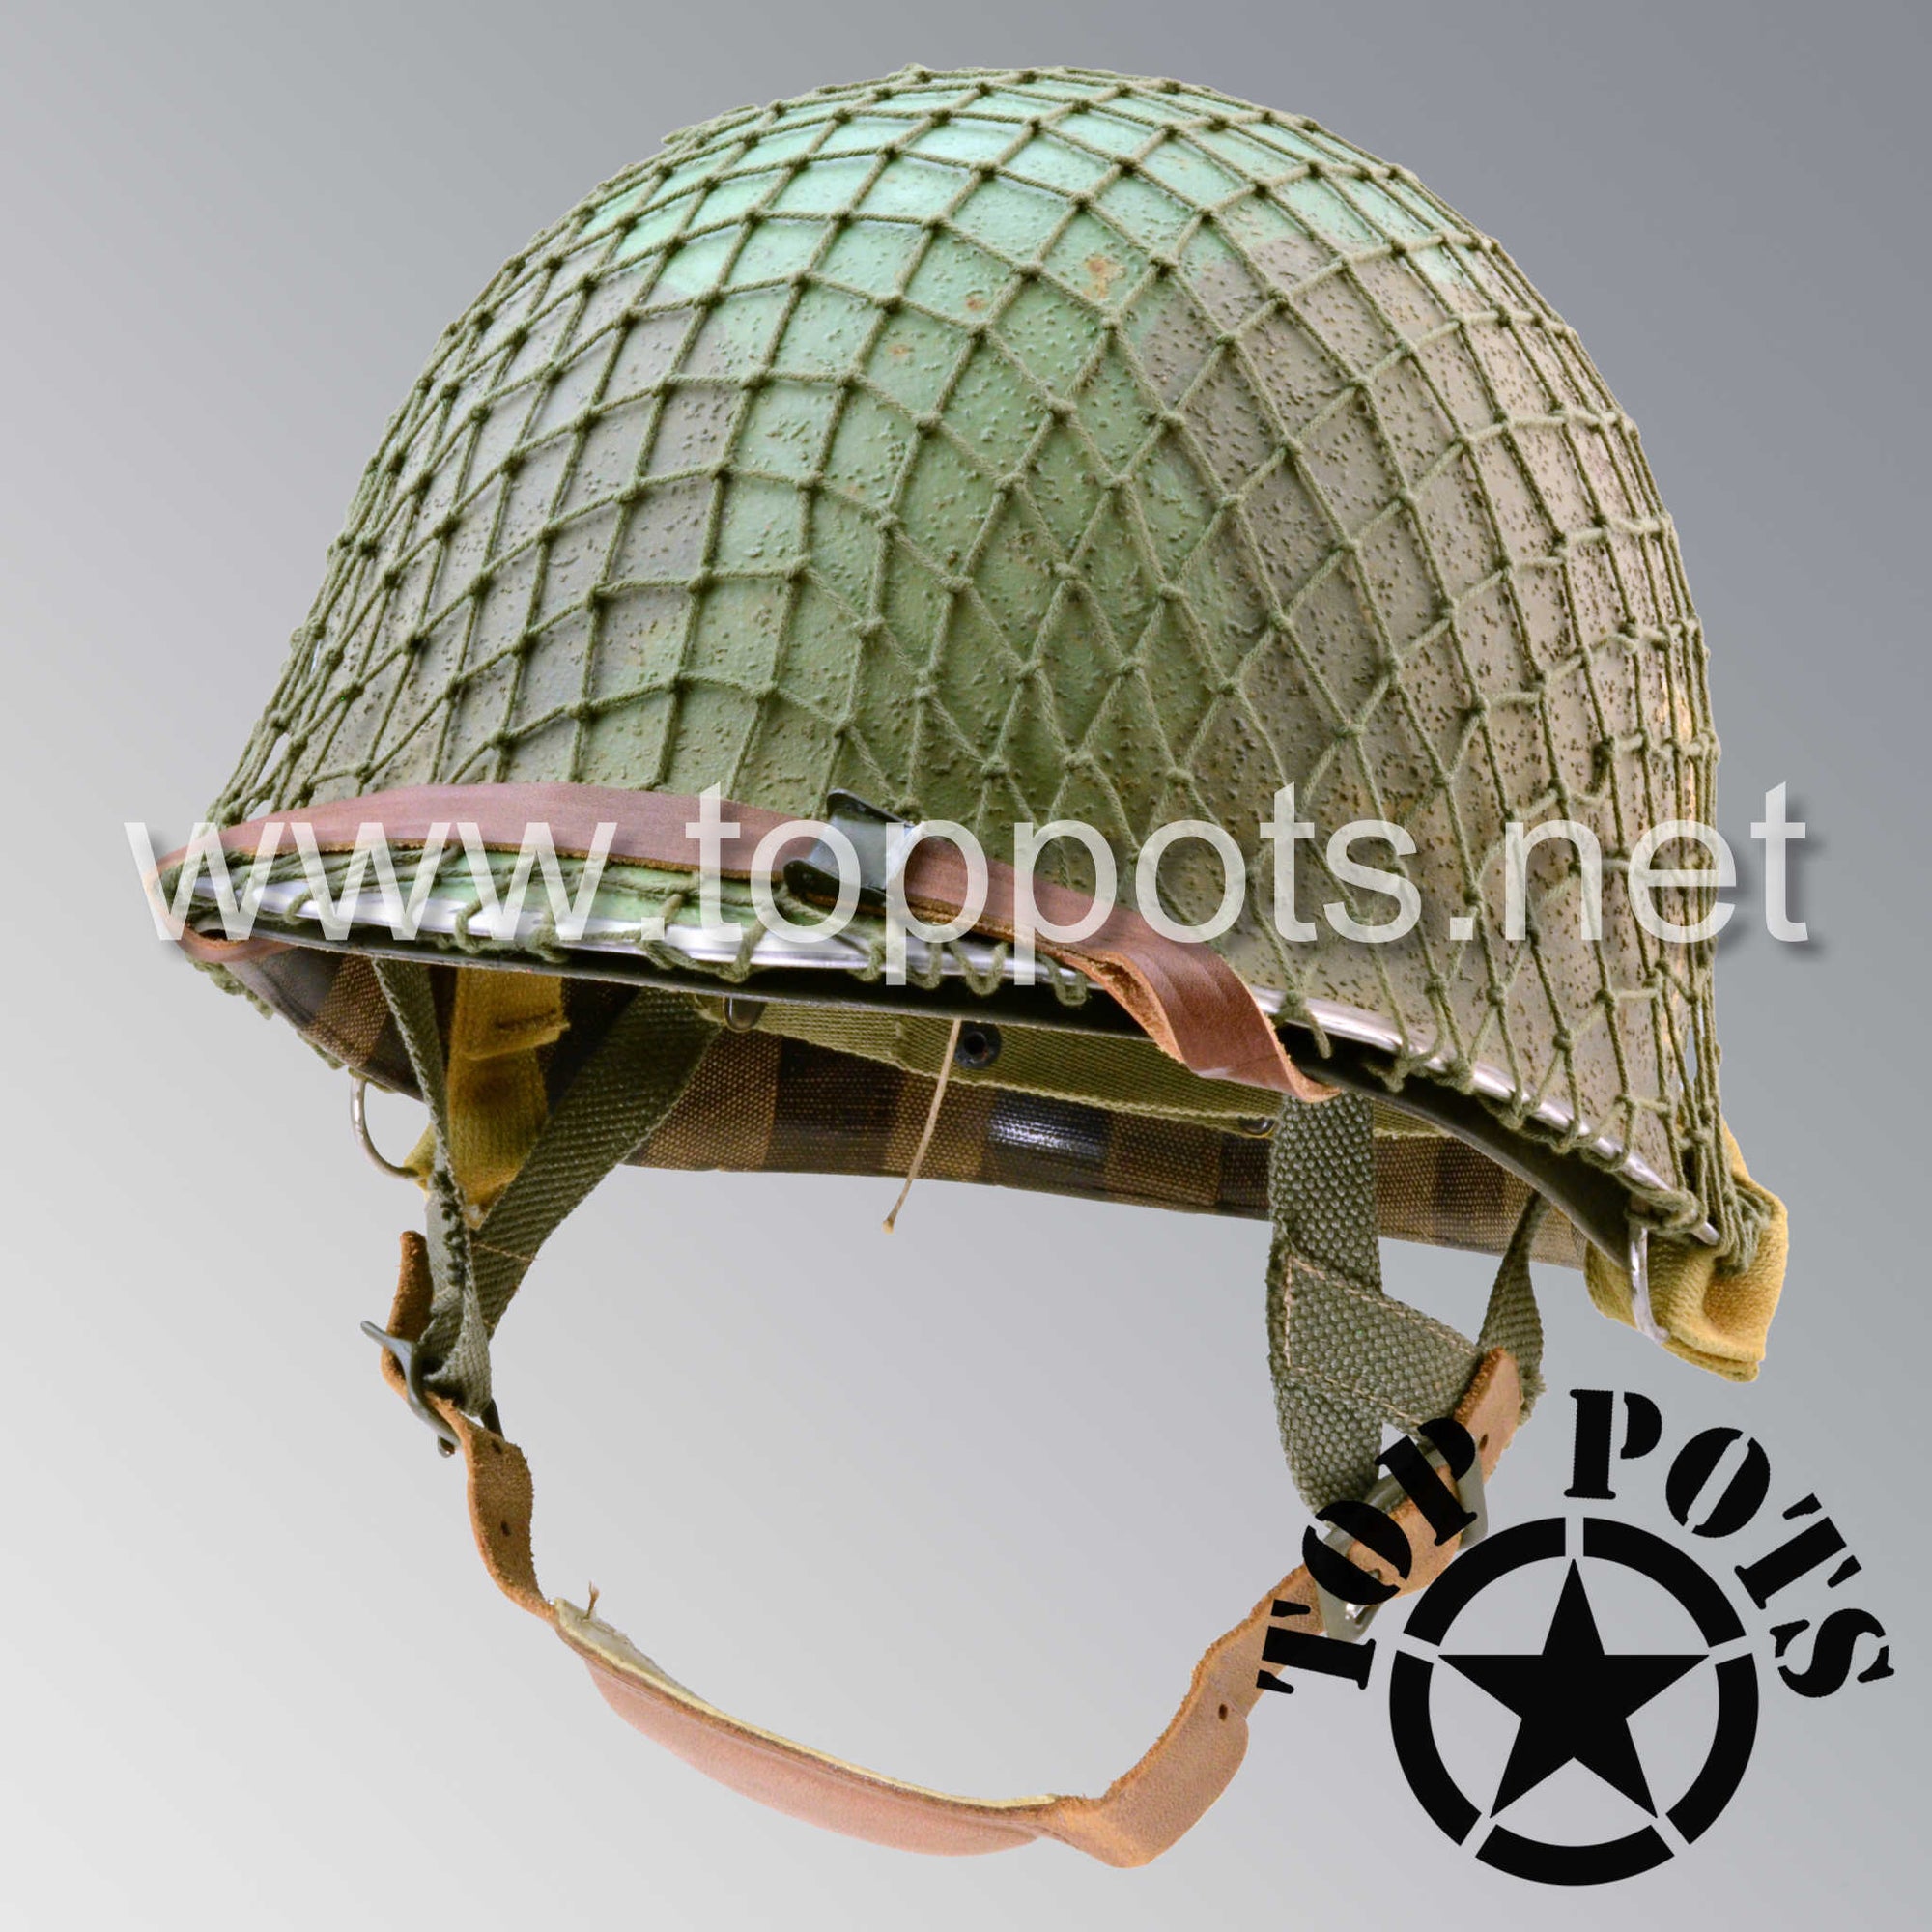 WWII US Army Aged Original M2 Paratrooper Airborne Helmet D Bale Shell and Liner with 551st PIR Pathfinder Camouflage Emblem and Net